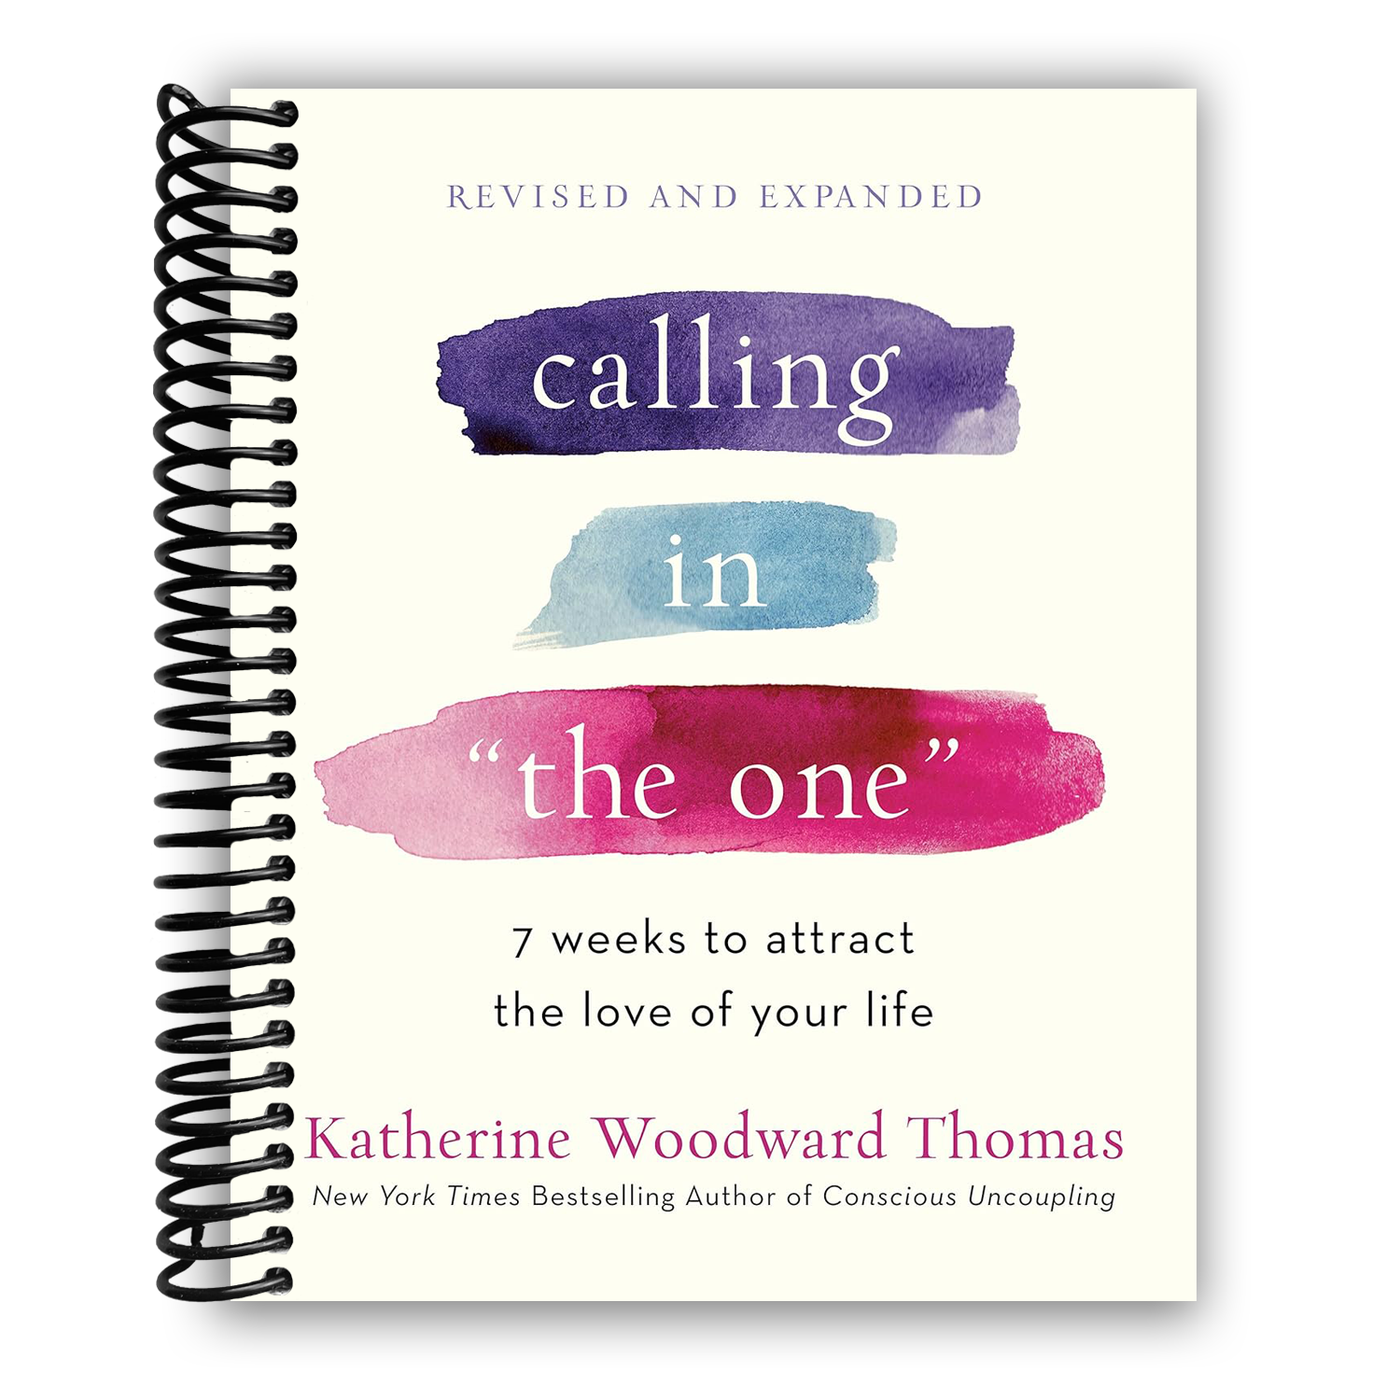 Calling in "The One" Revised and Expanded: 7 Weeks to Attract the Love of Your Life (Spiral Bound)